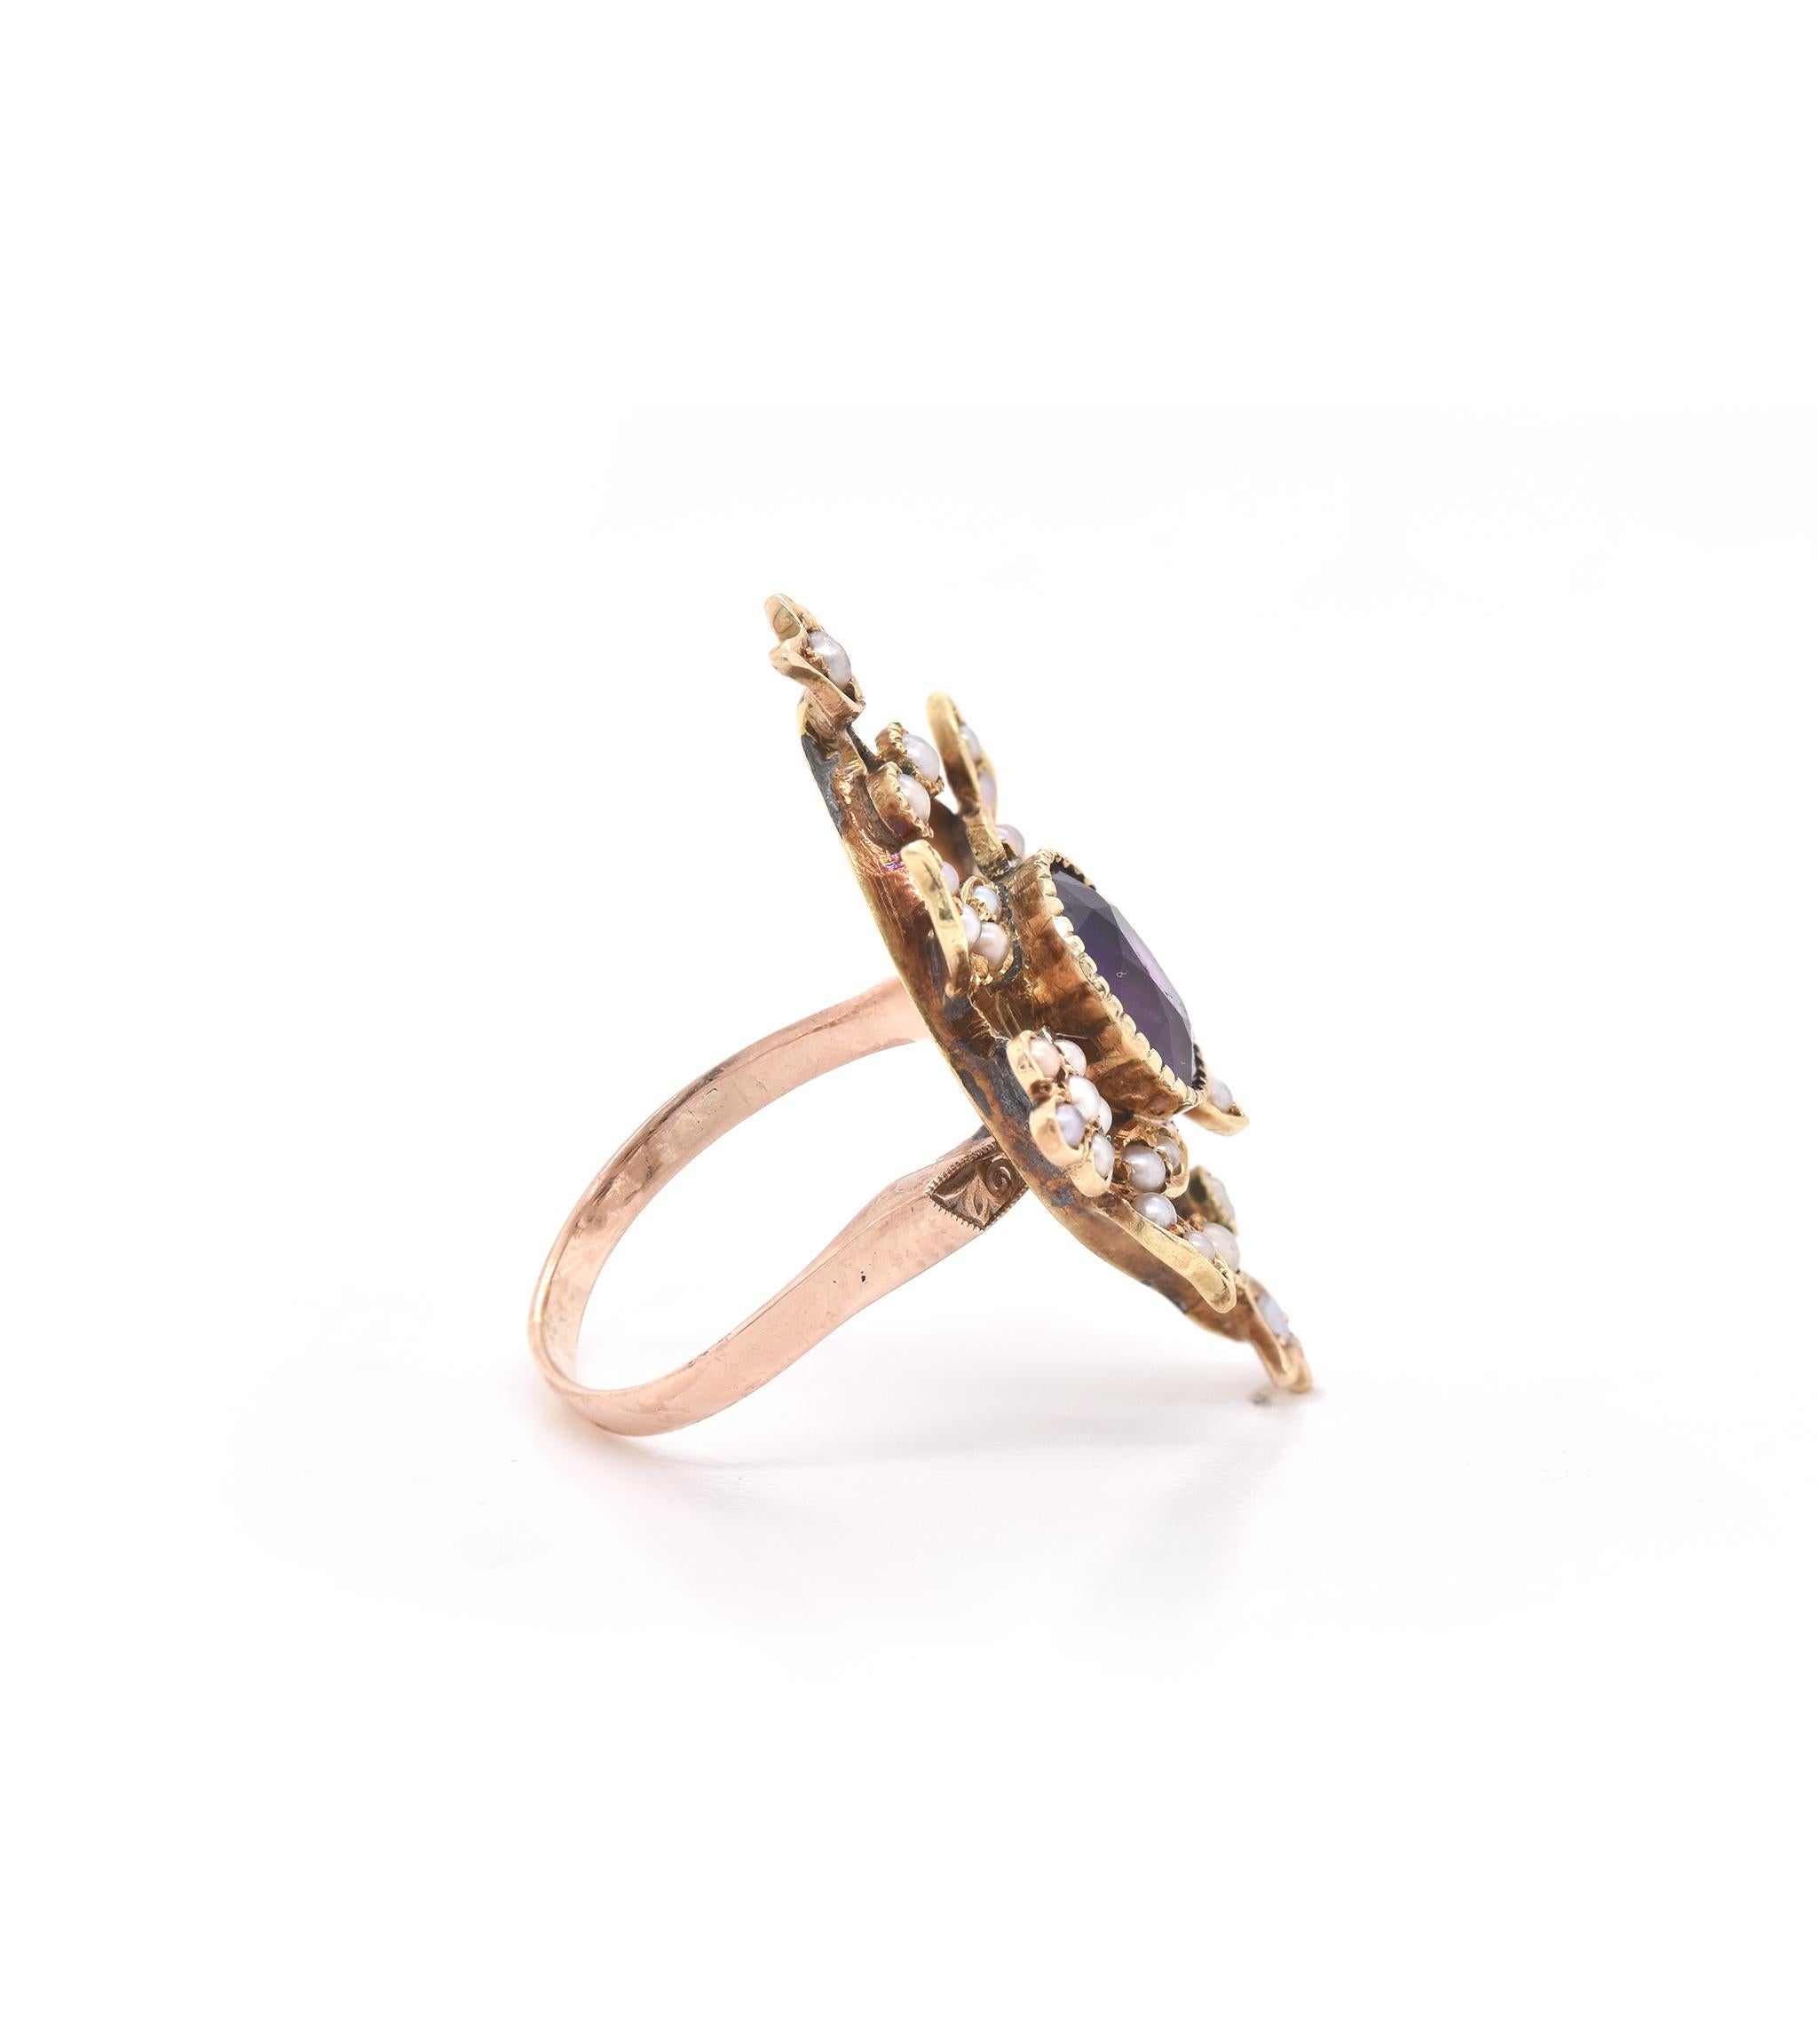 Designer: custom design
Material: 14k yellow gold
Gemstone: oval cut faceted amethyst
Pearls: 32
Ring Size: 6 1/4 (please allow two additional shipping days for sizing requests)
Dimensions: ring top measures 30.03mm by 20.34mm
Weight: 4.63  grams
